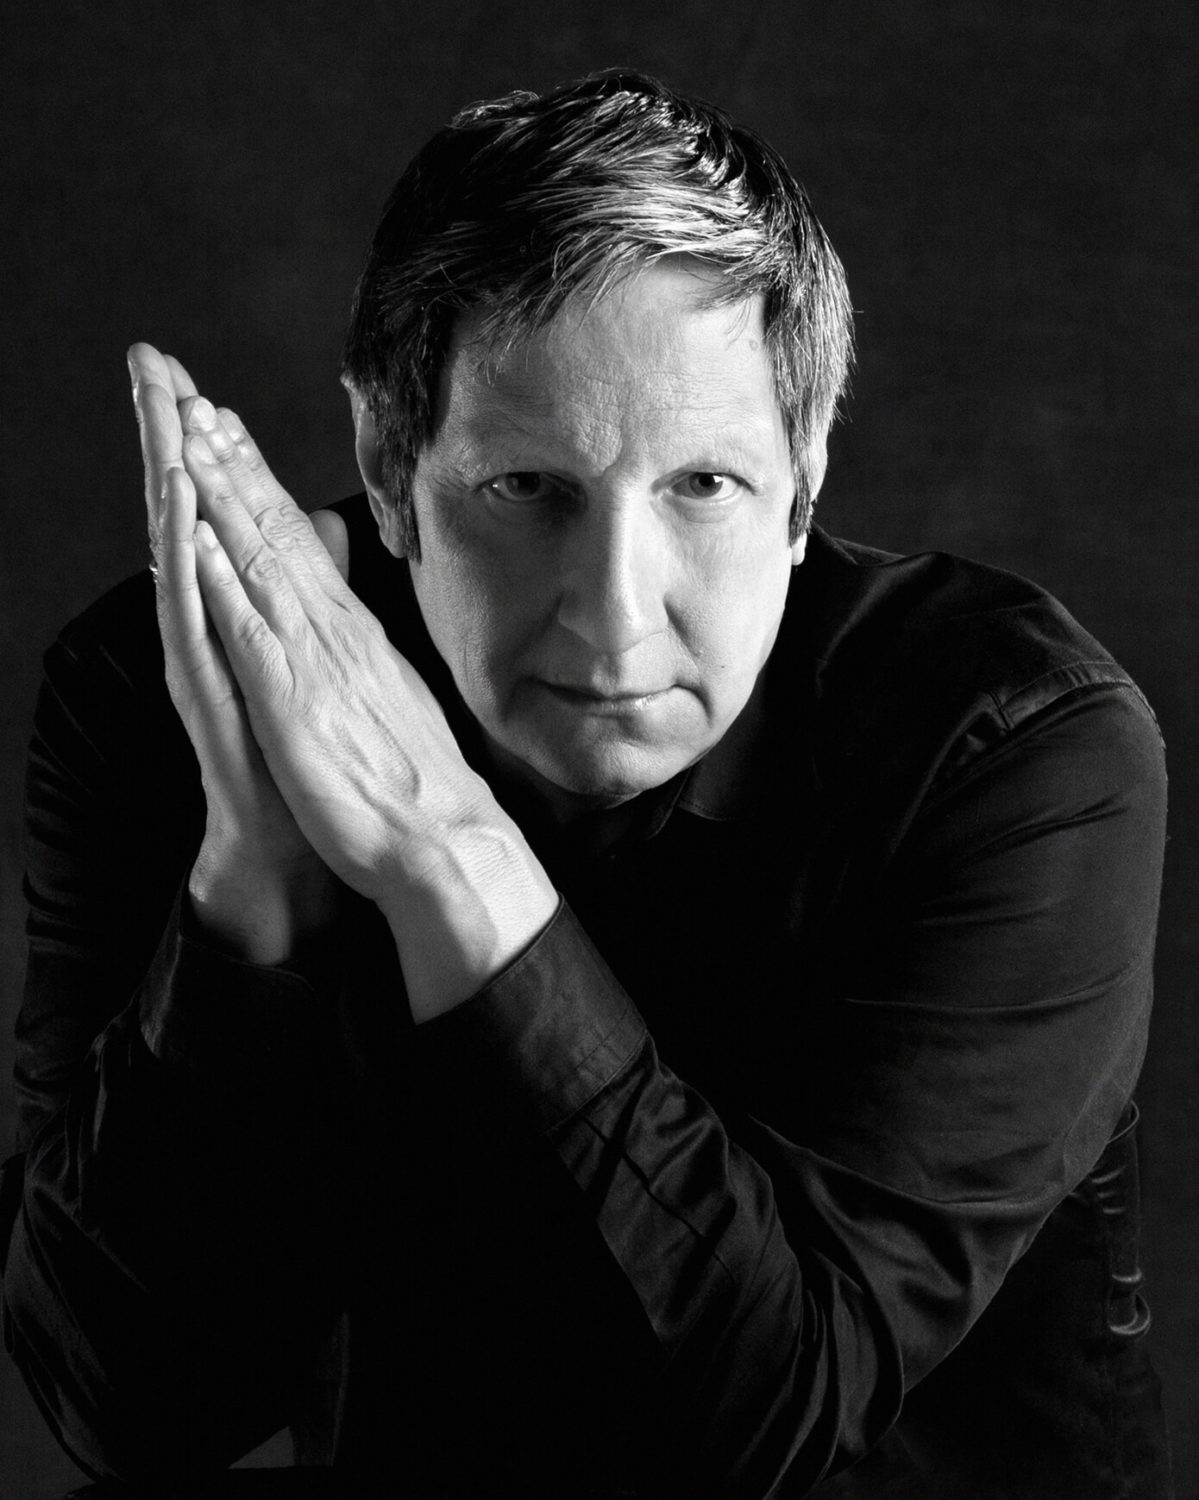 Robert LePage has great hair…and he's really, really smart.